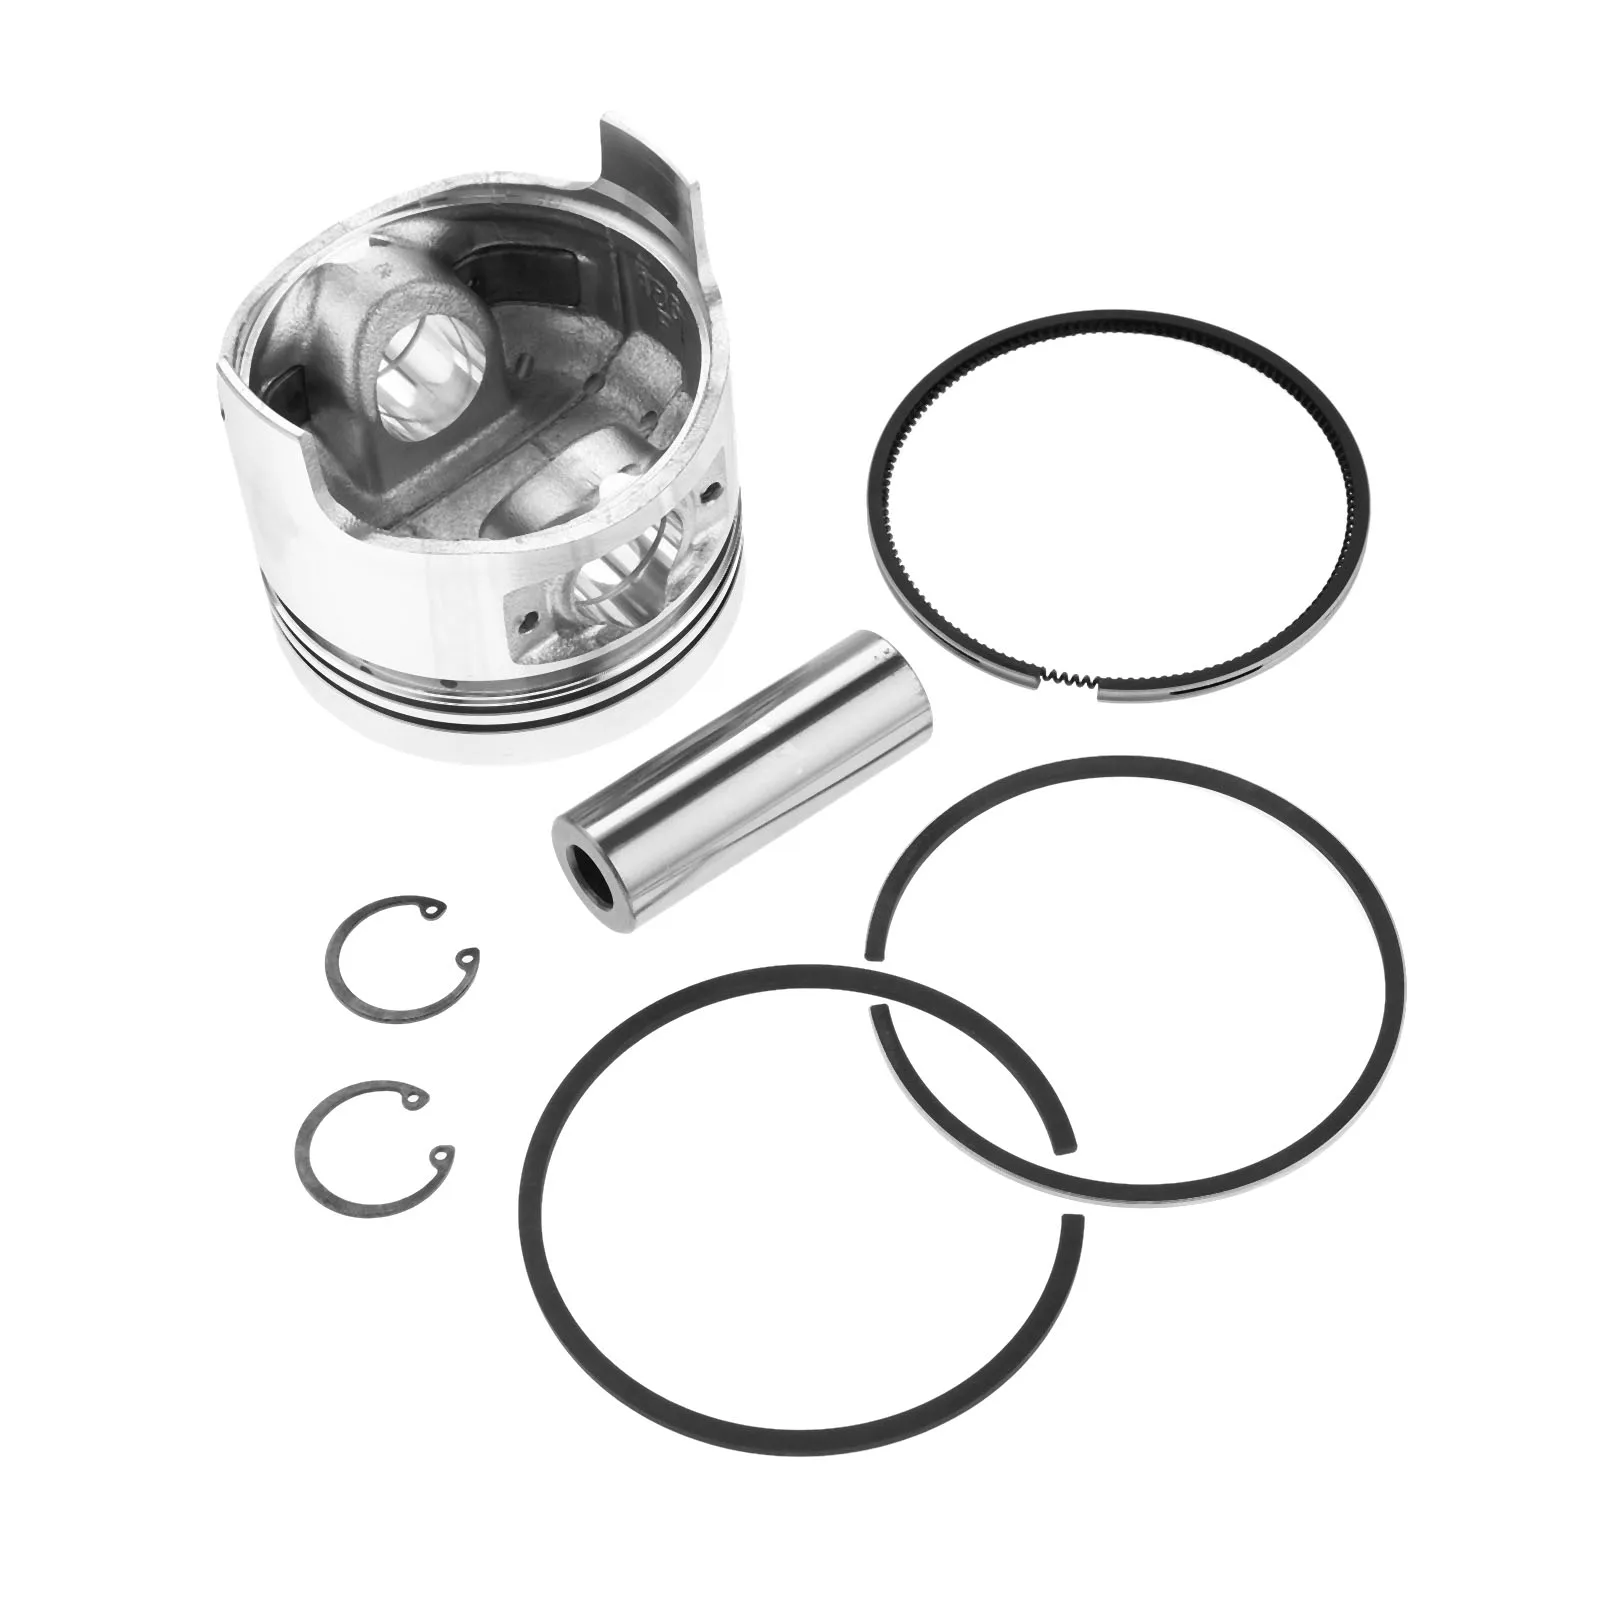 DRELD Piston Assembly with Piston Pin Piston Ring Circlip Set fit for Chinese 186F 86mm Bore Diesel Engine Generator Parts